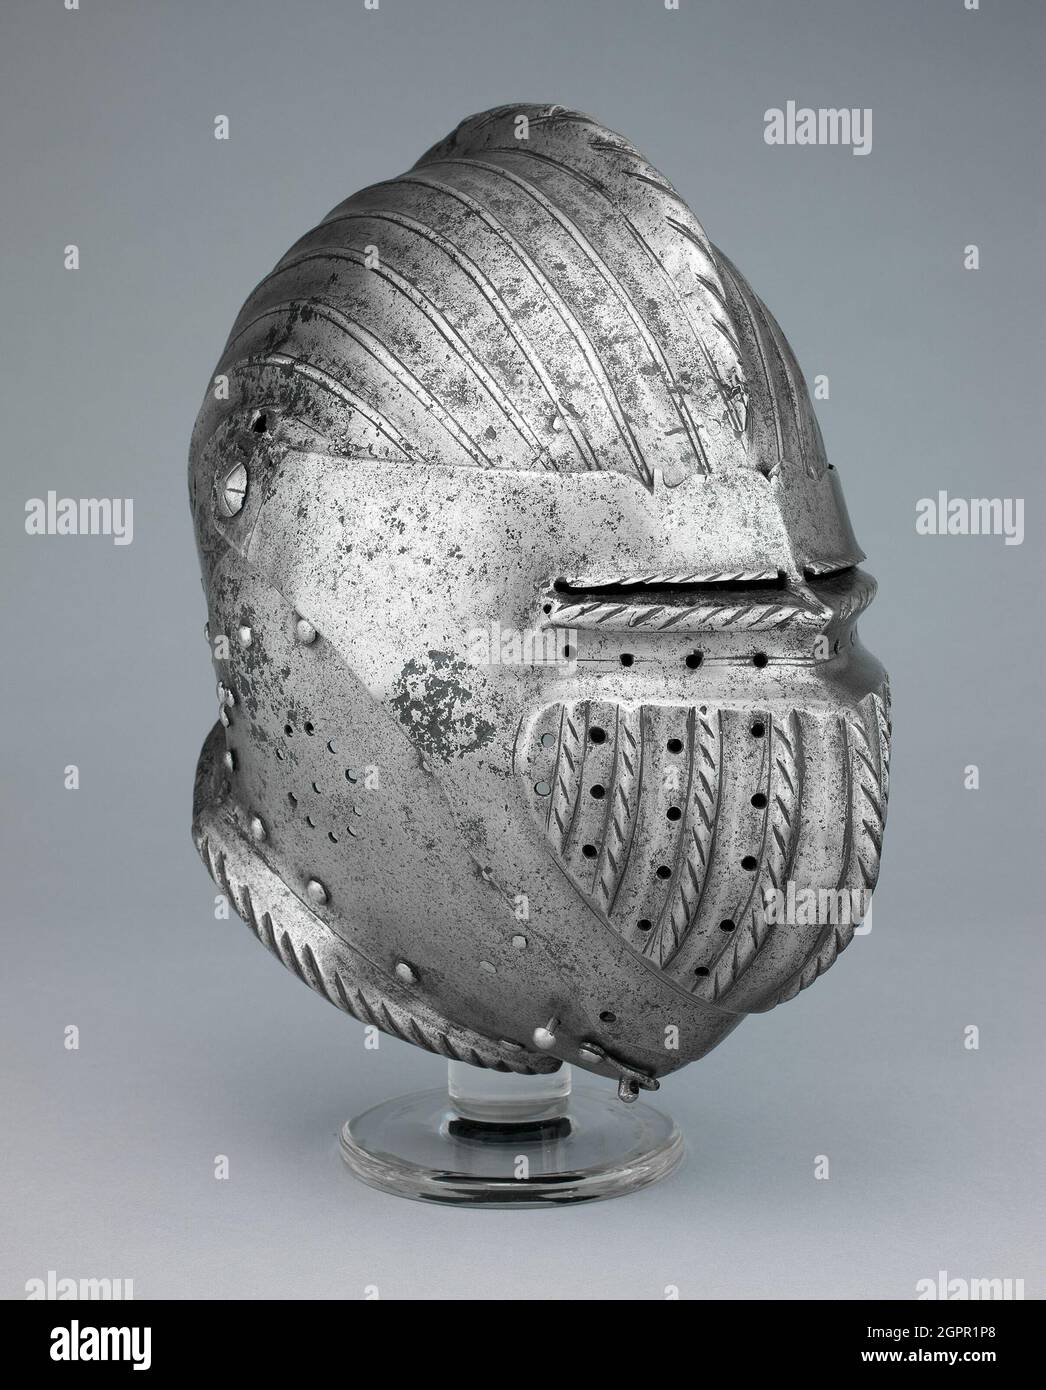 Armet, Southern Germany, c. 1520/30. Stock Photo